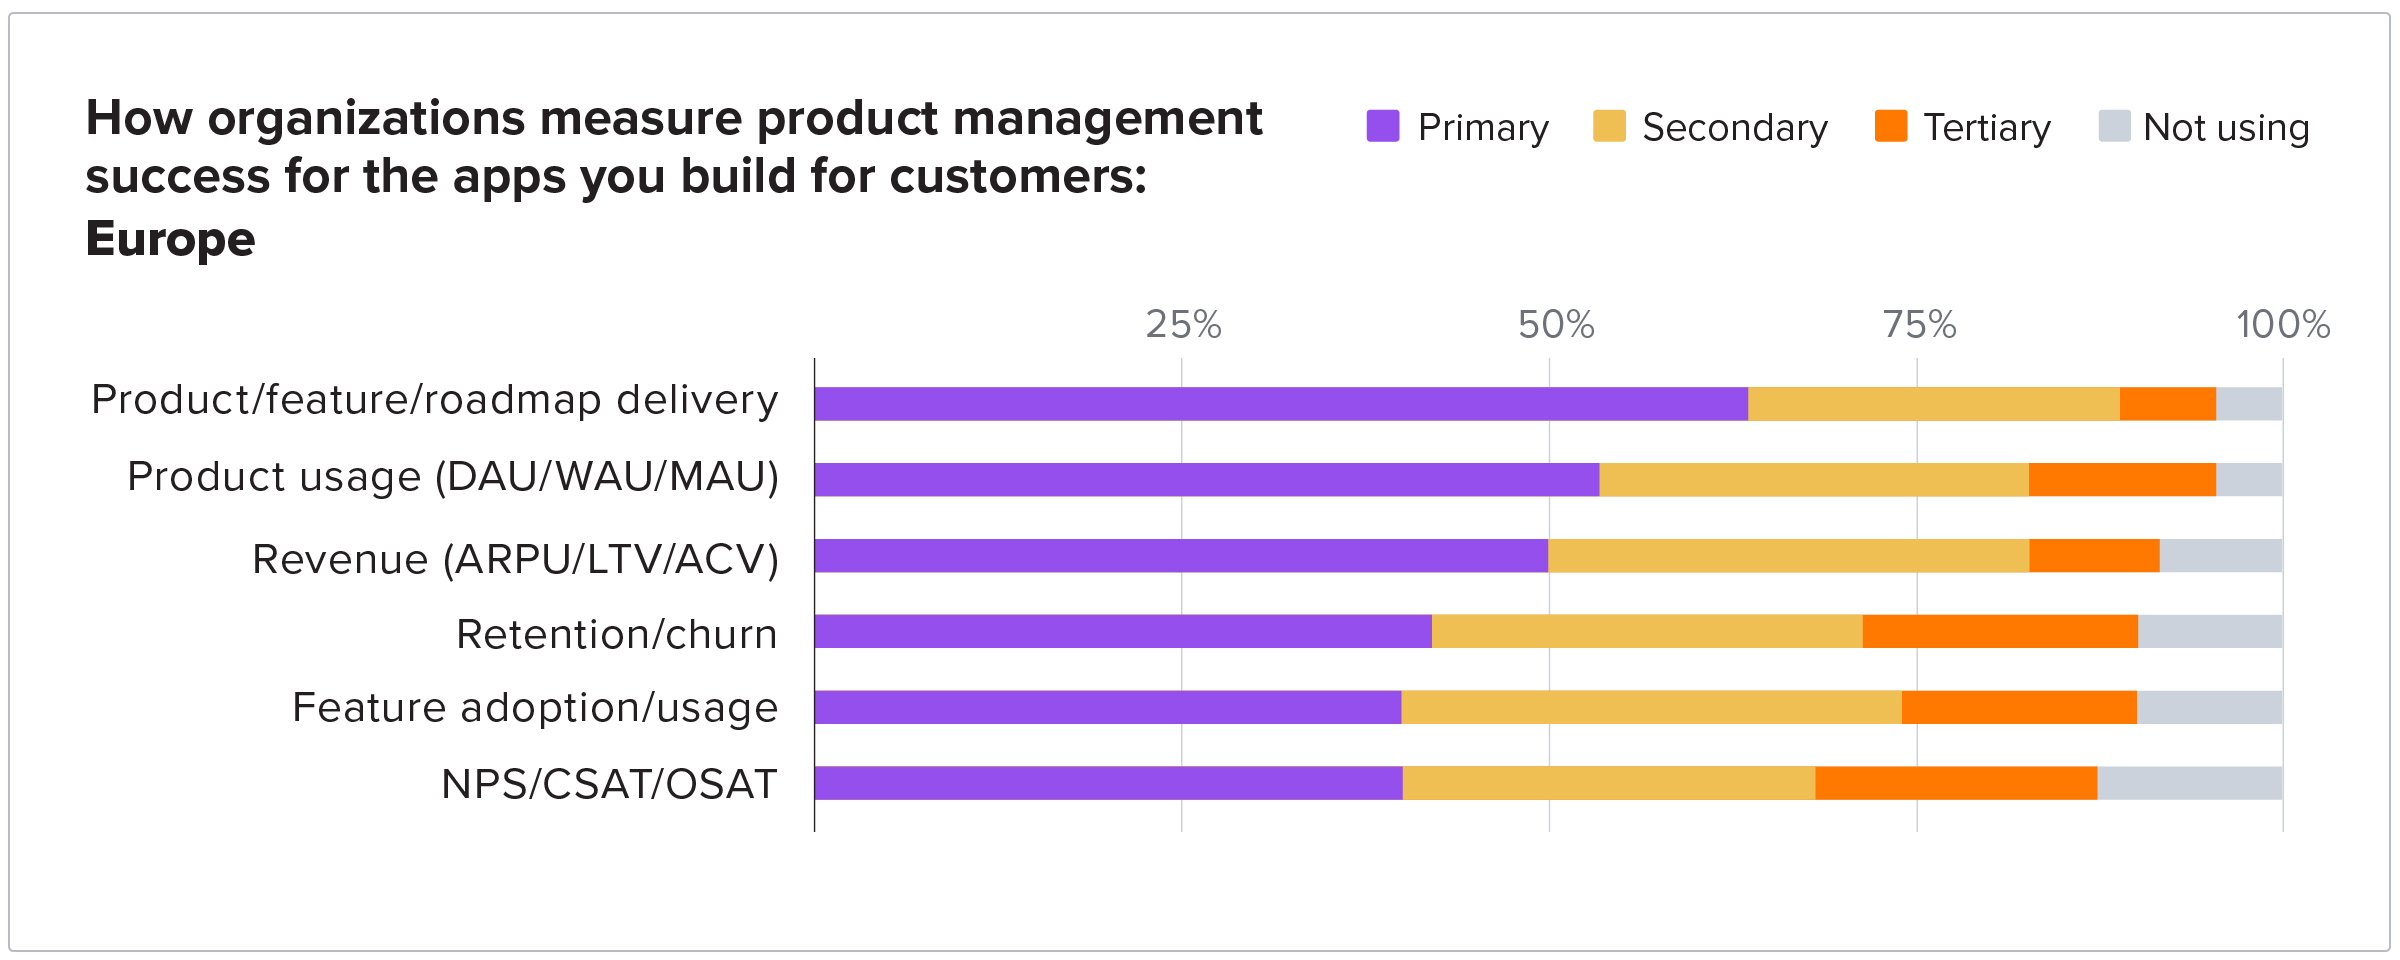 How organisations measure product management success for the apps built for customers: Europe